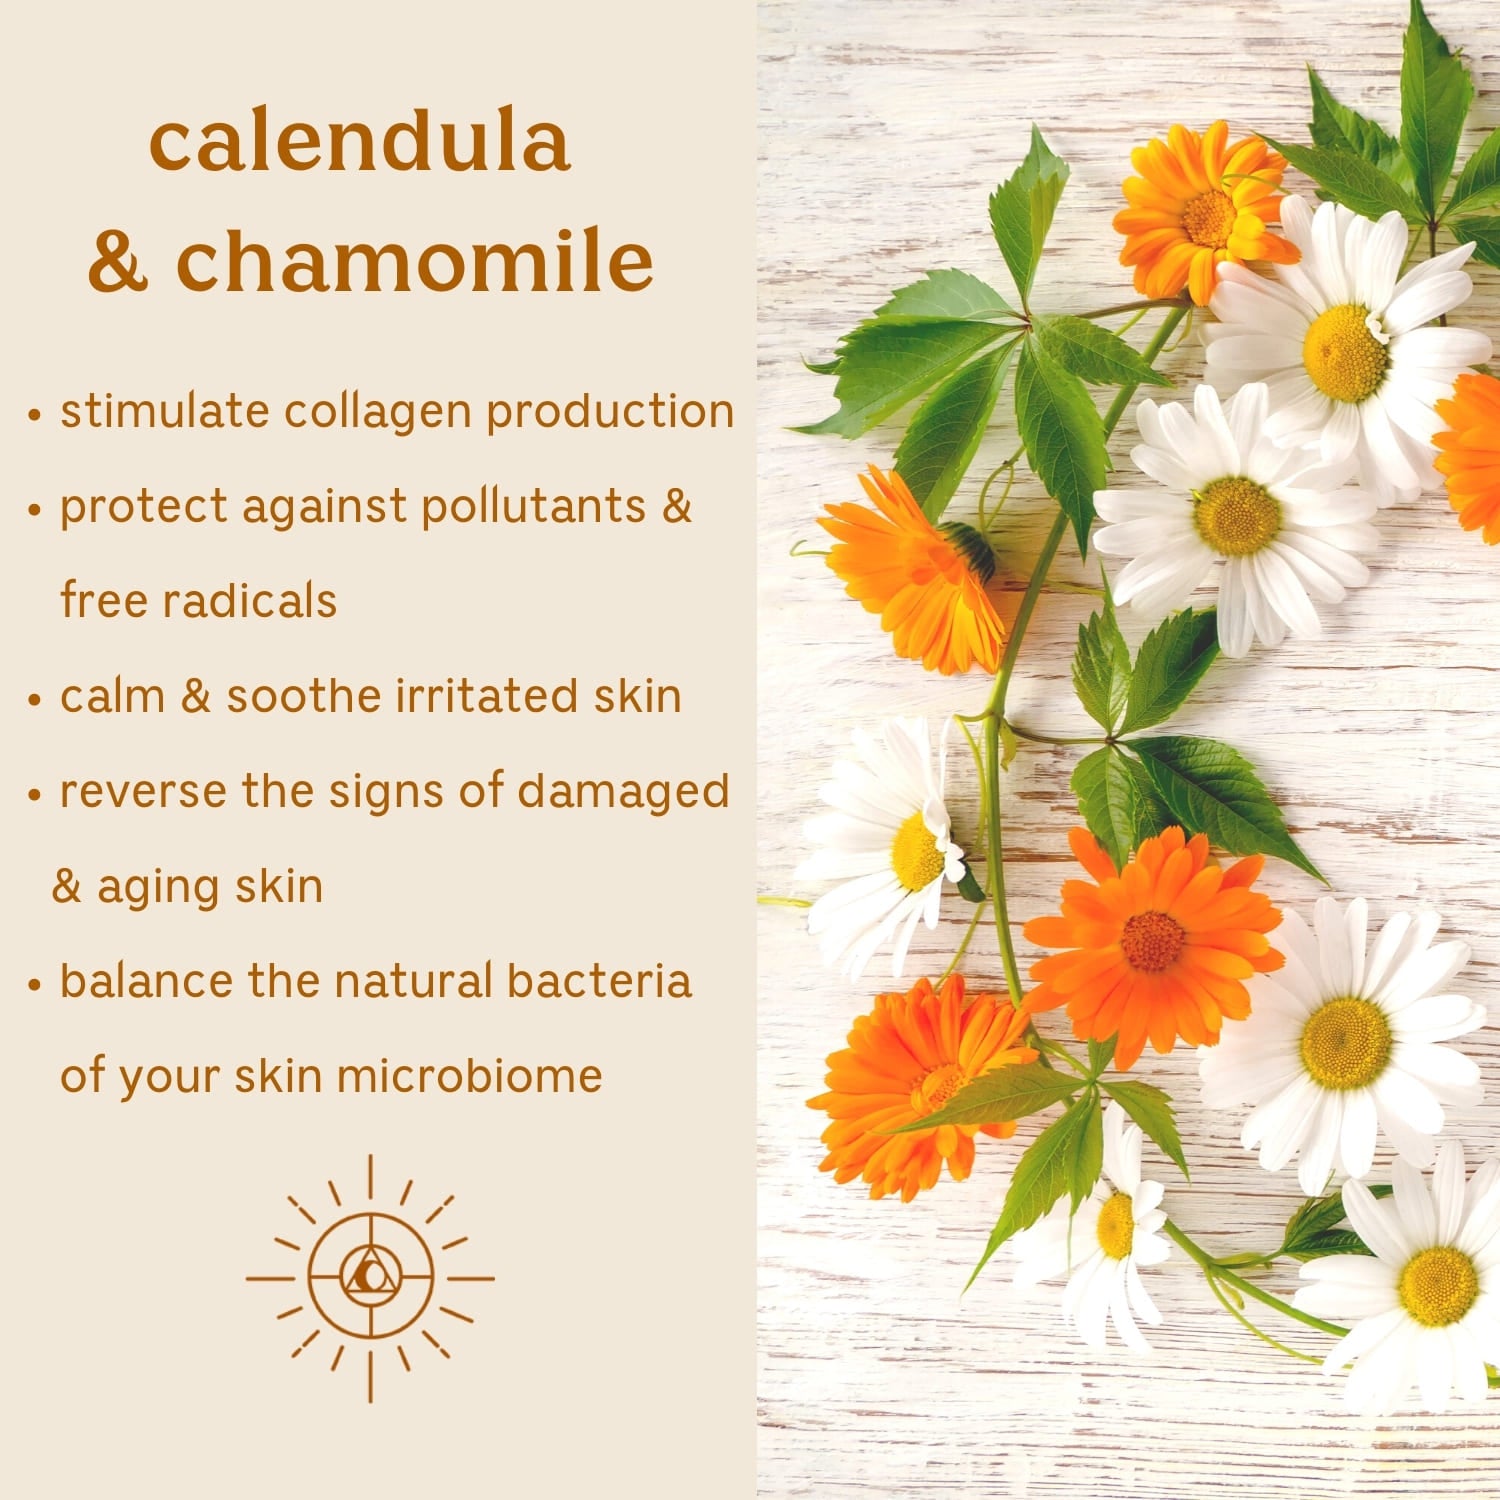 Solluna's Feel Good Eye Cream key ingredient benefit description. Calendula & Chamomile: Stimulate collagen production, Protect against pollutants & free radicals, Calm & soothe irritated skin, Reverse the signs of damaged & aging skin, Balance the natural bacteria of your skin microbiome